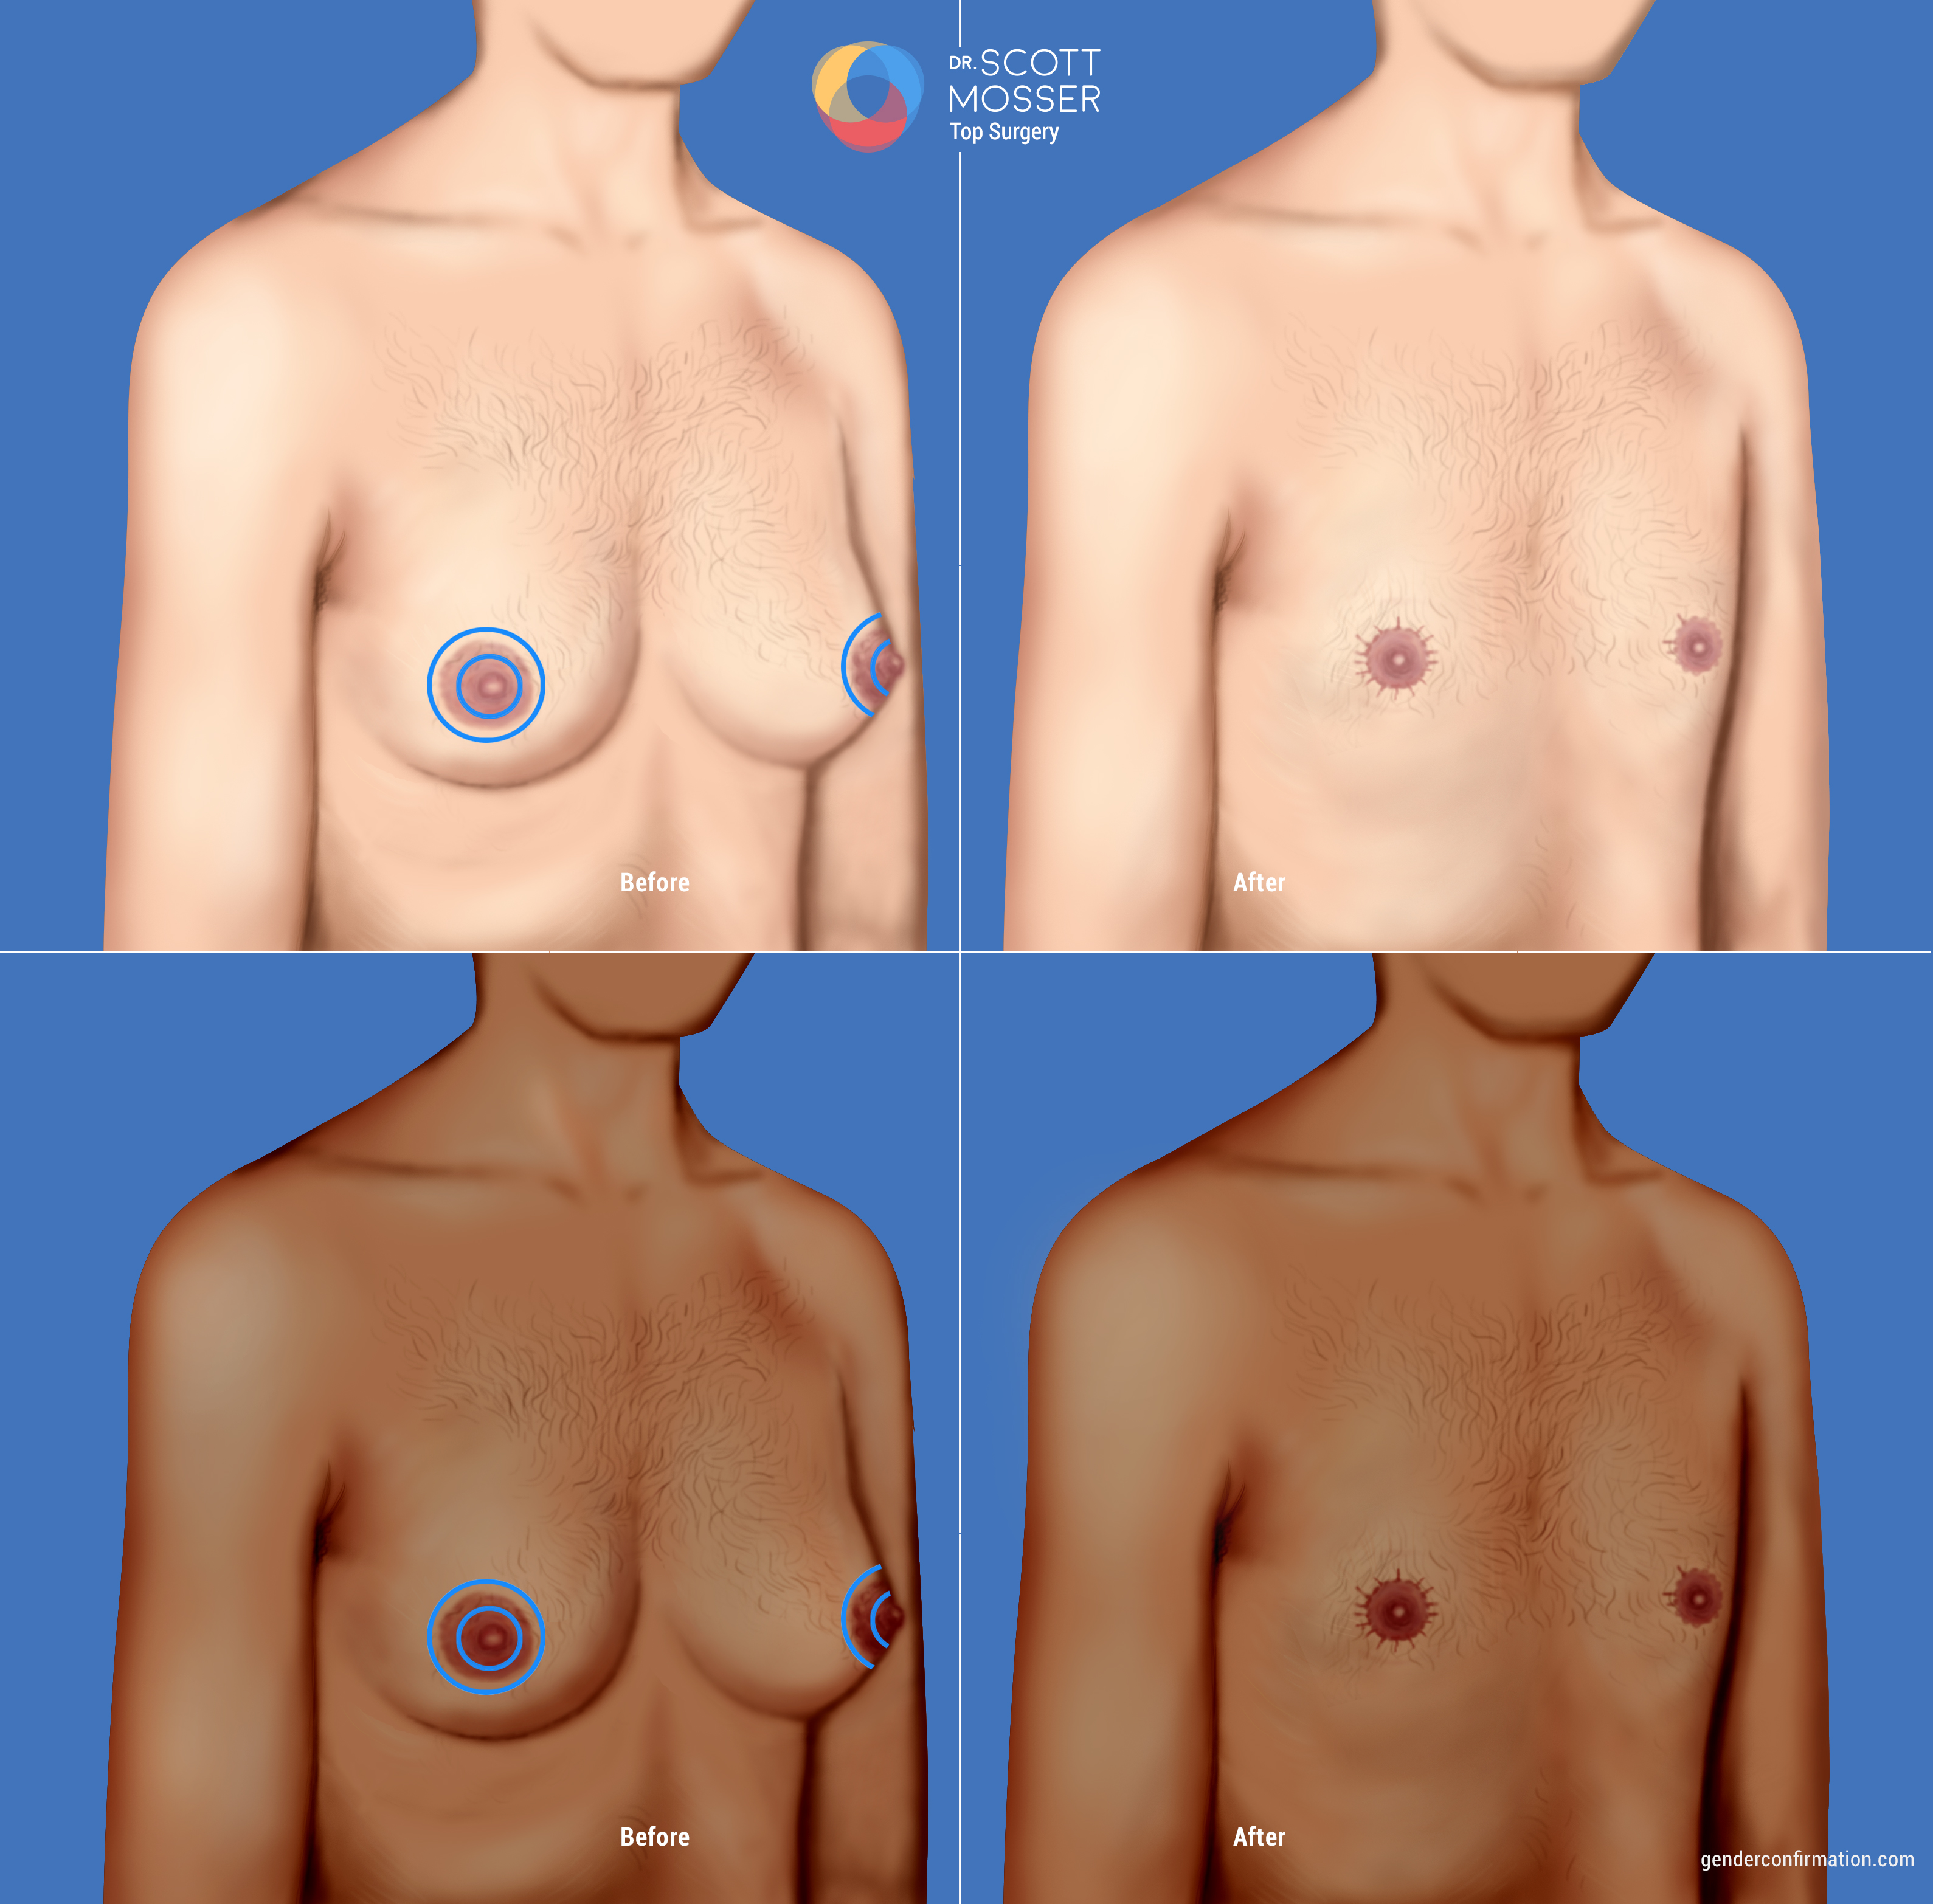 Complete resection of the nipple before and after double purse